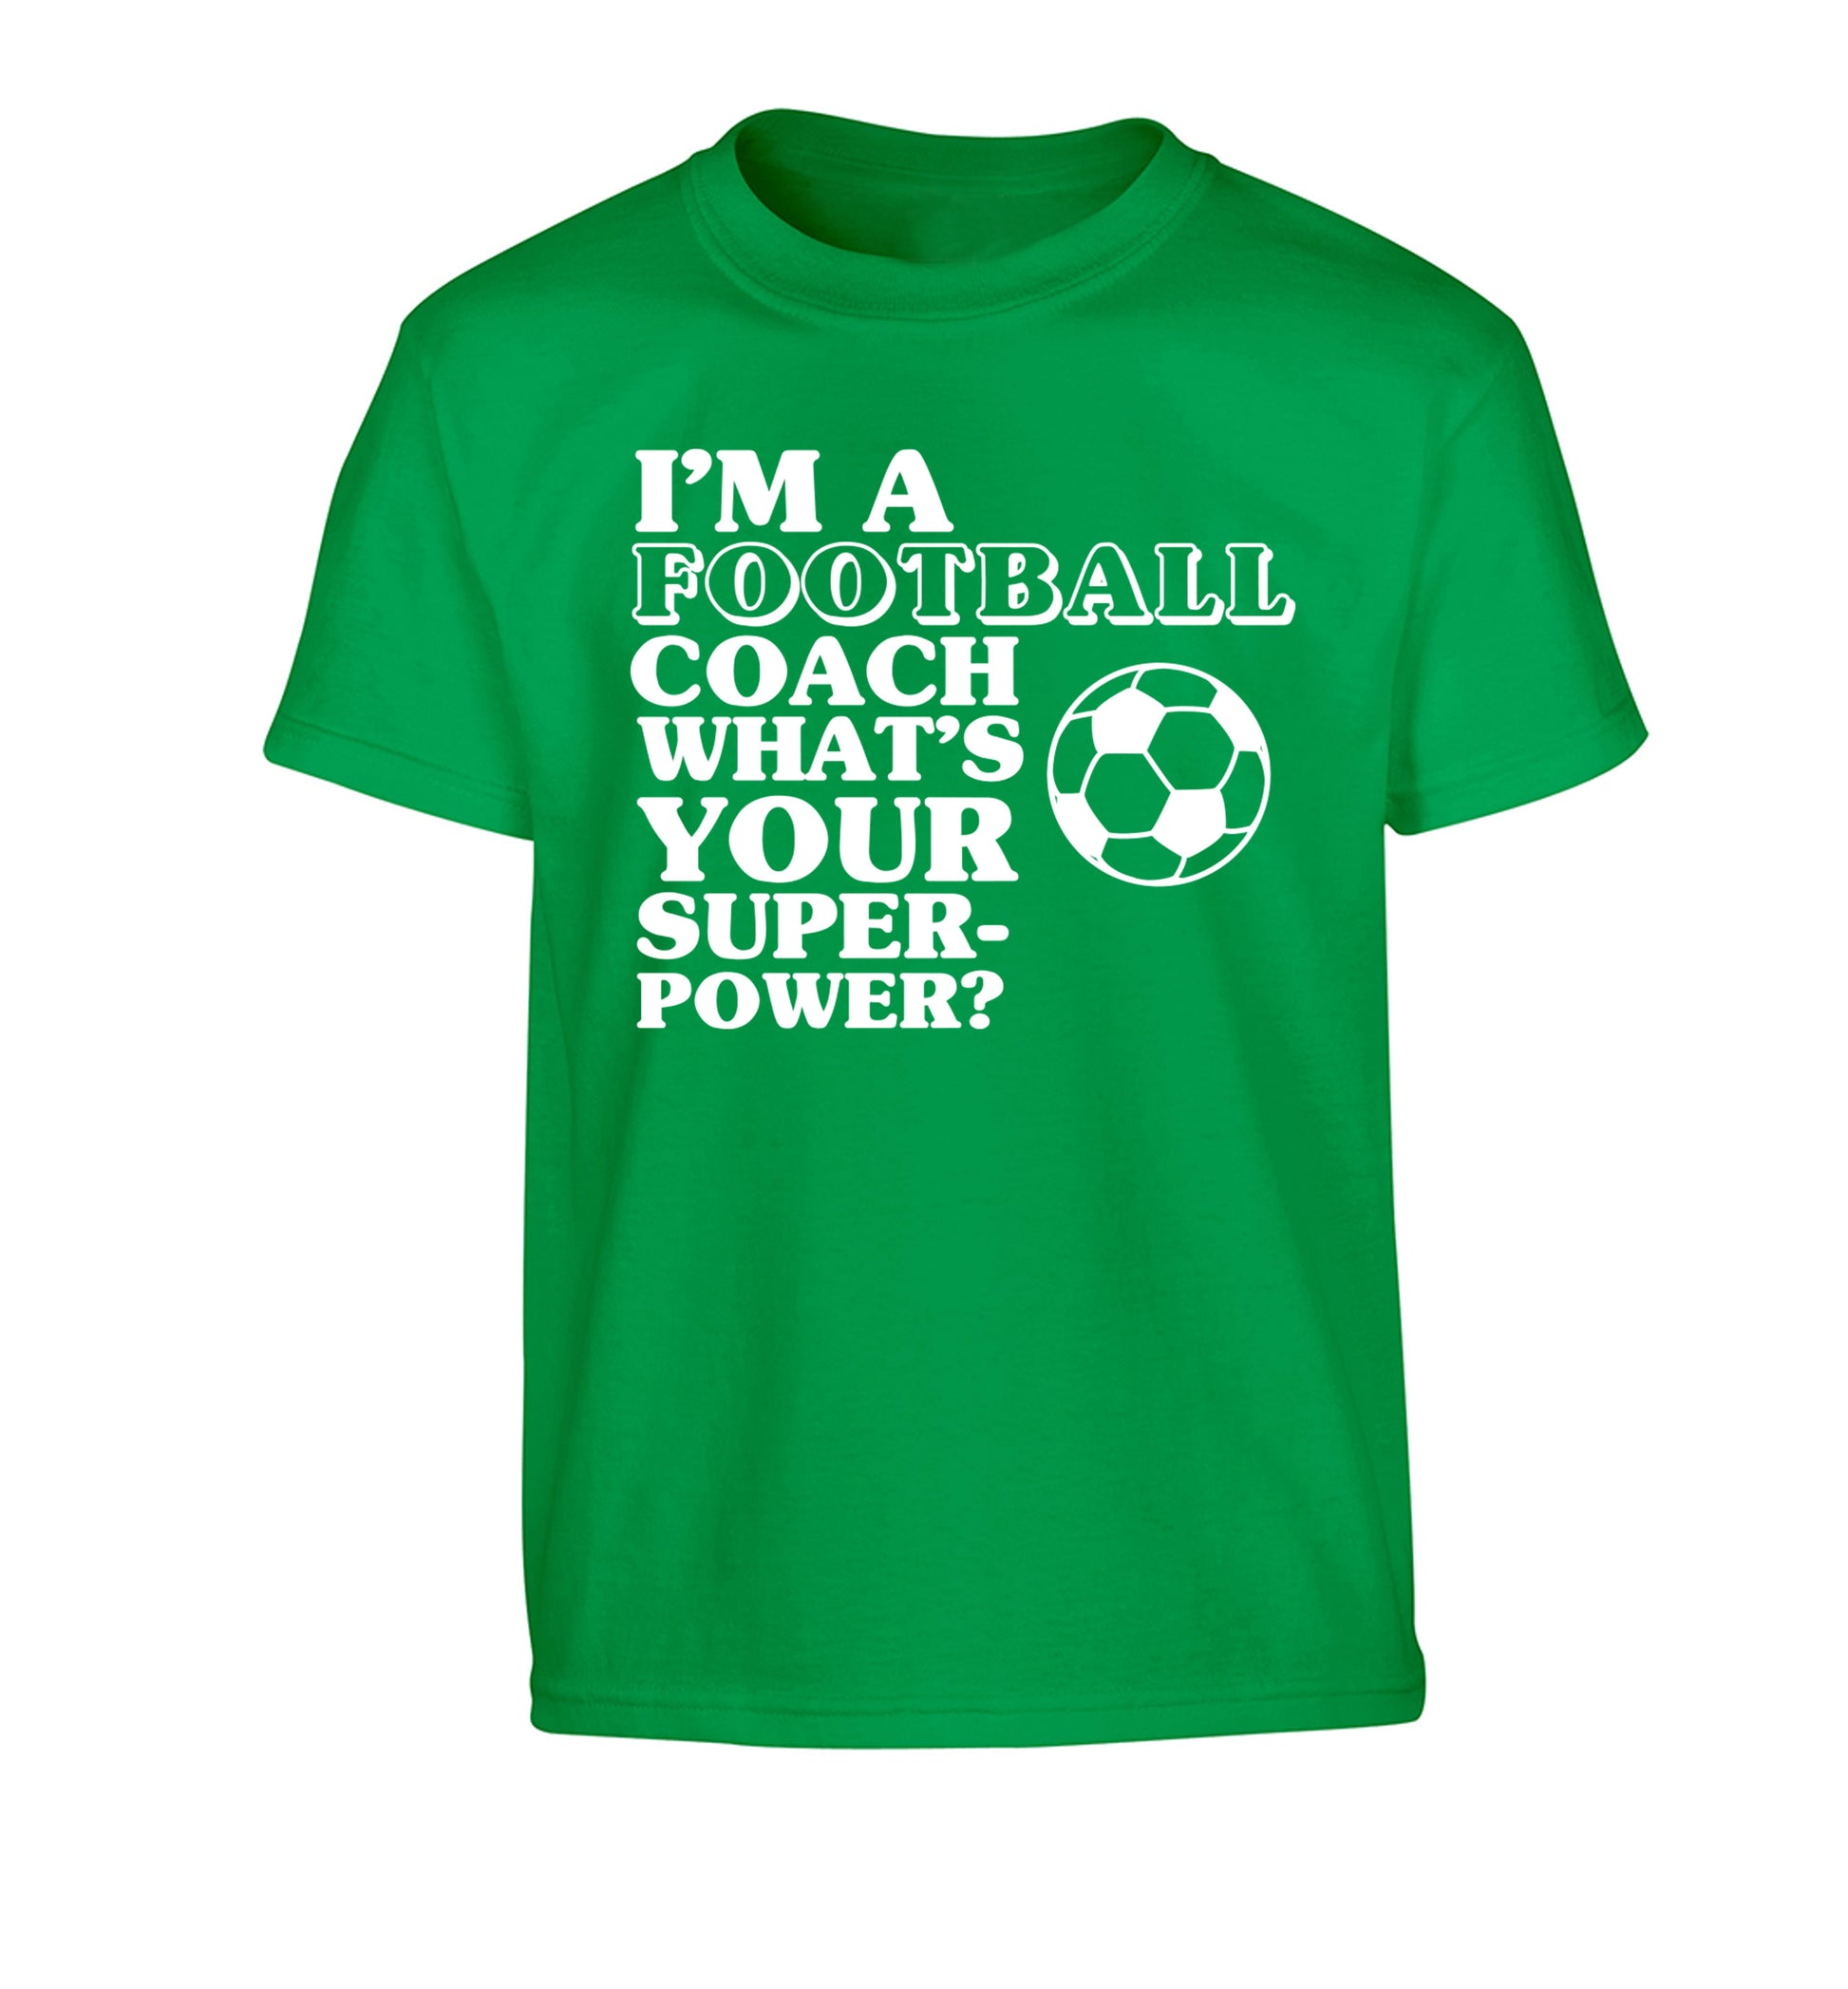 I'm a football coach what's your superpower? Children's green Tshirt 12-14 Years